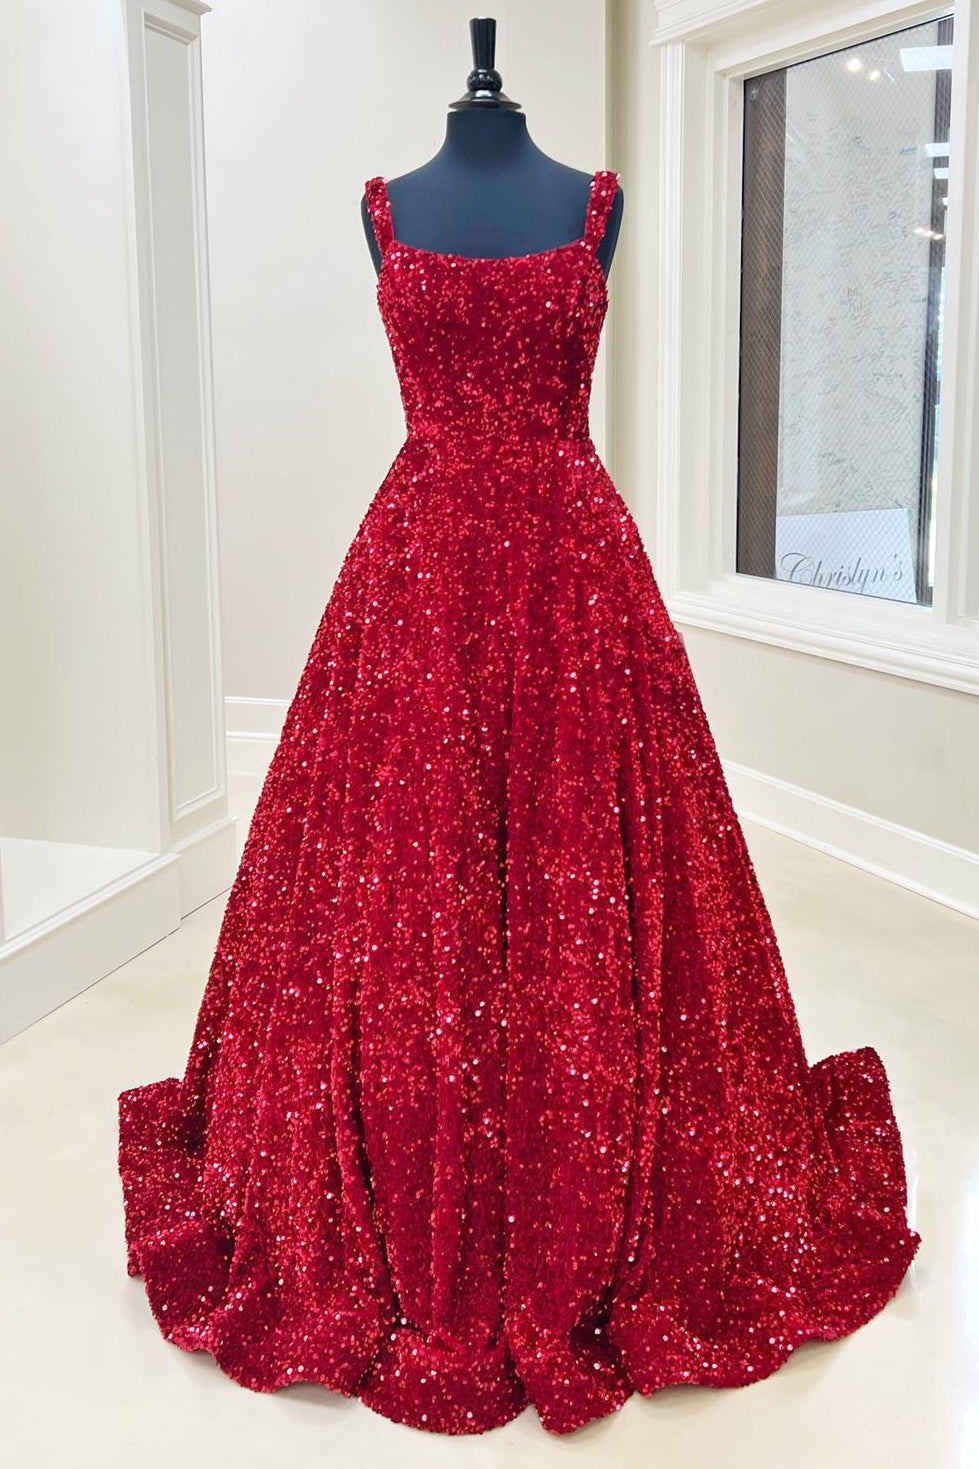 Shop spaghetti straps rose red sequin mermaid prom dress from Hocogirl.com